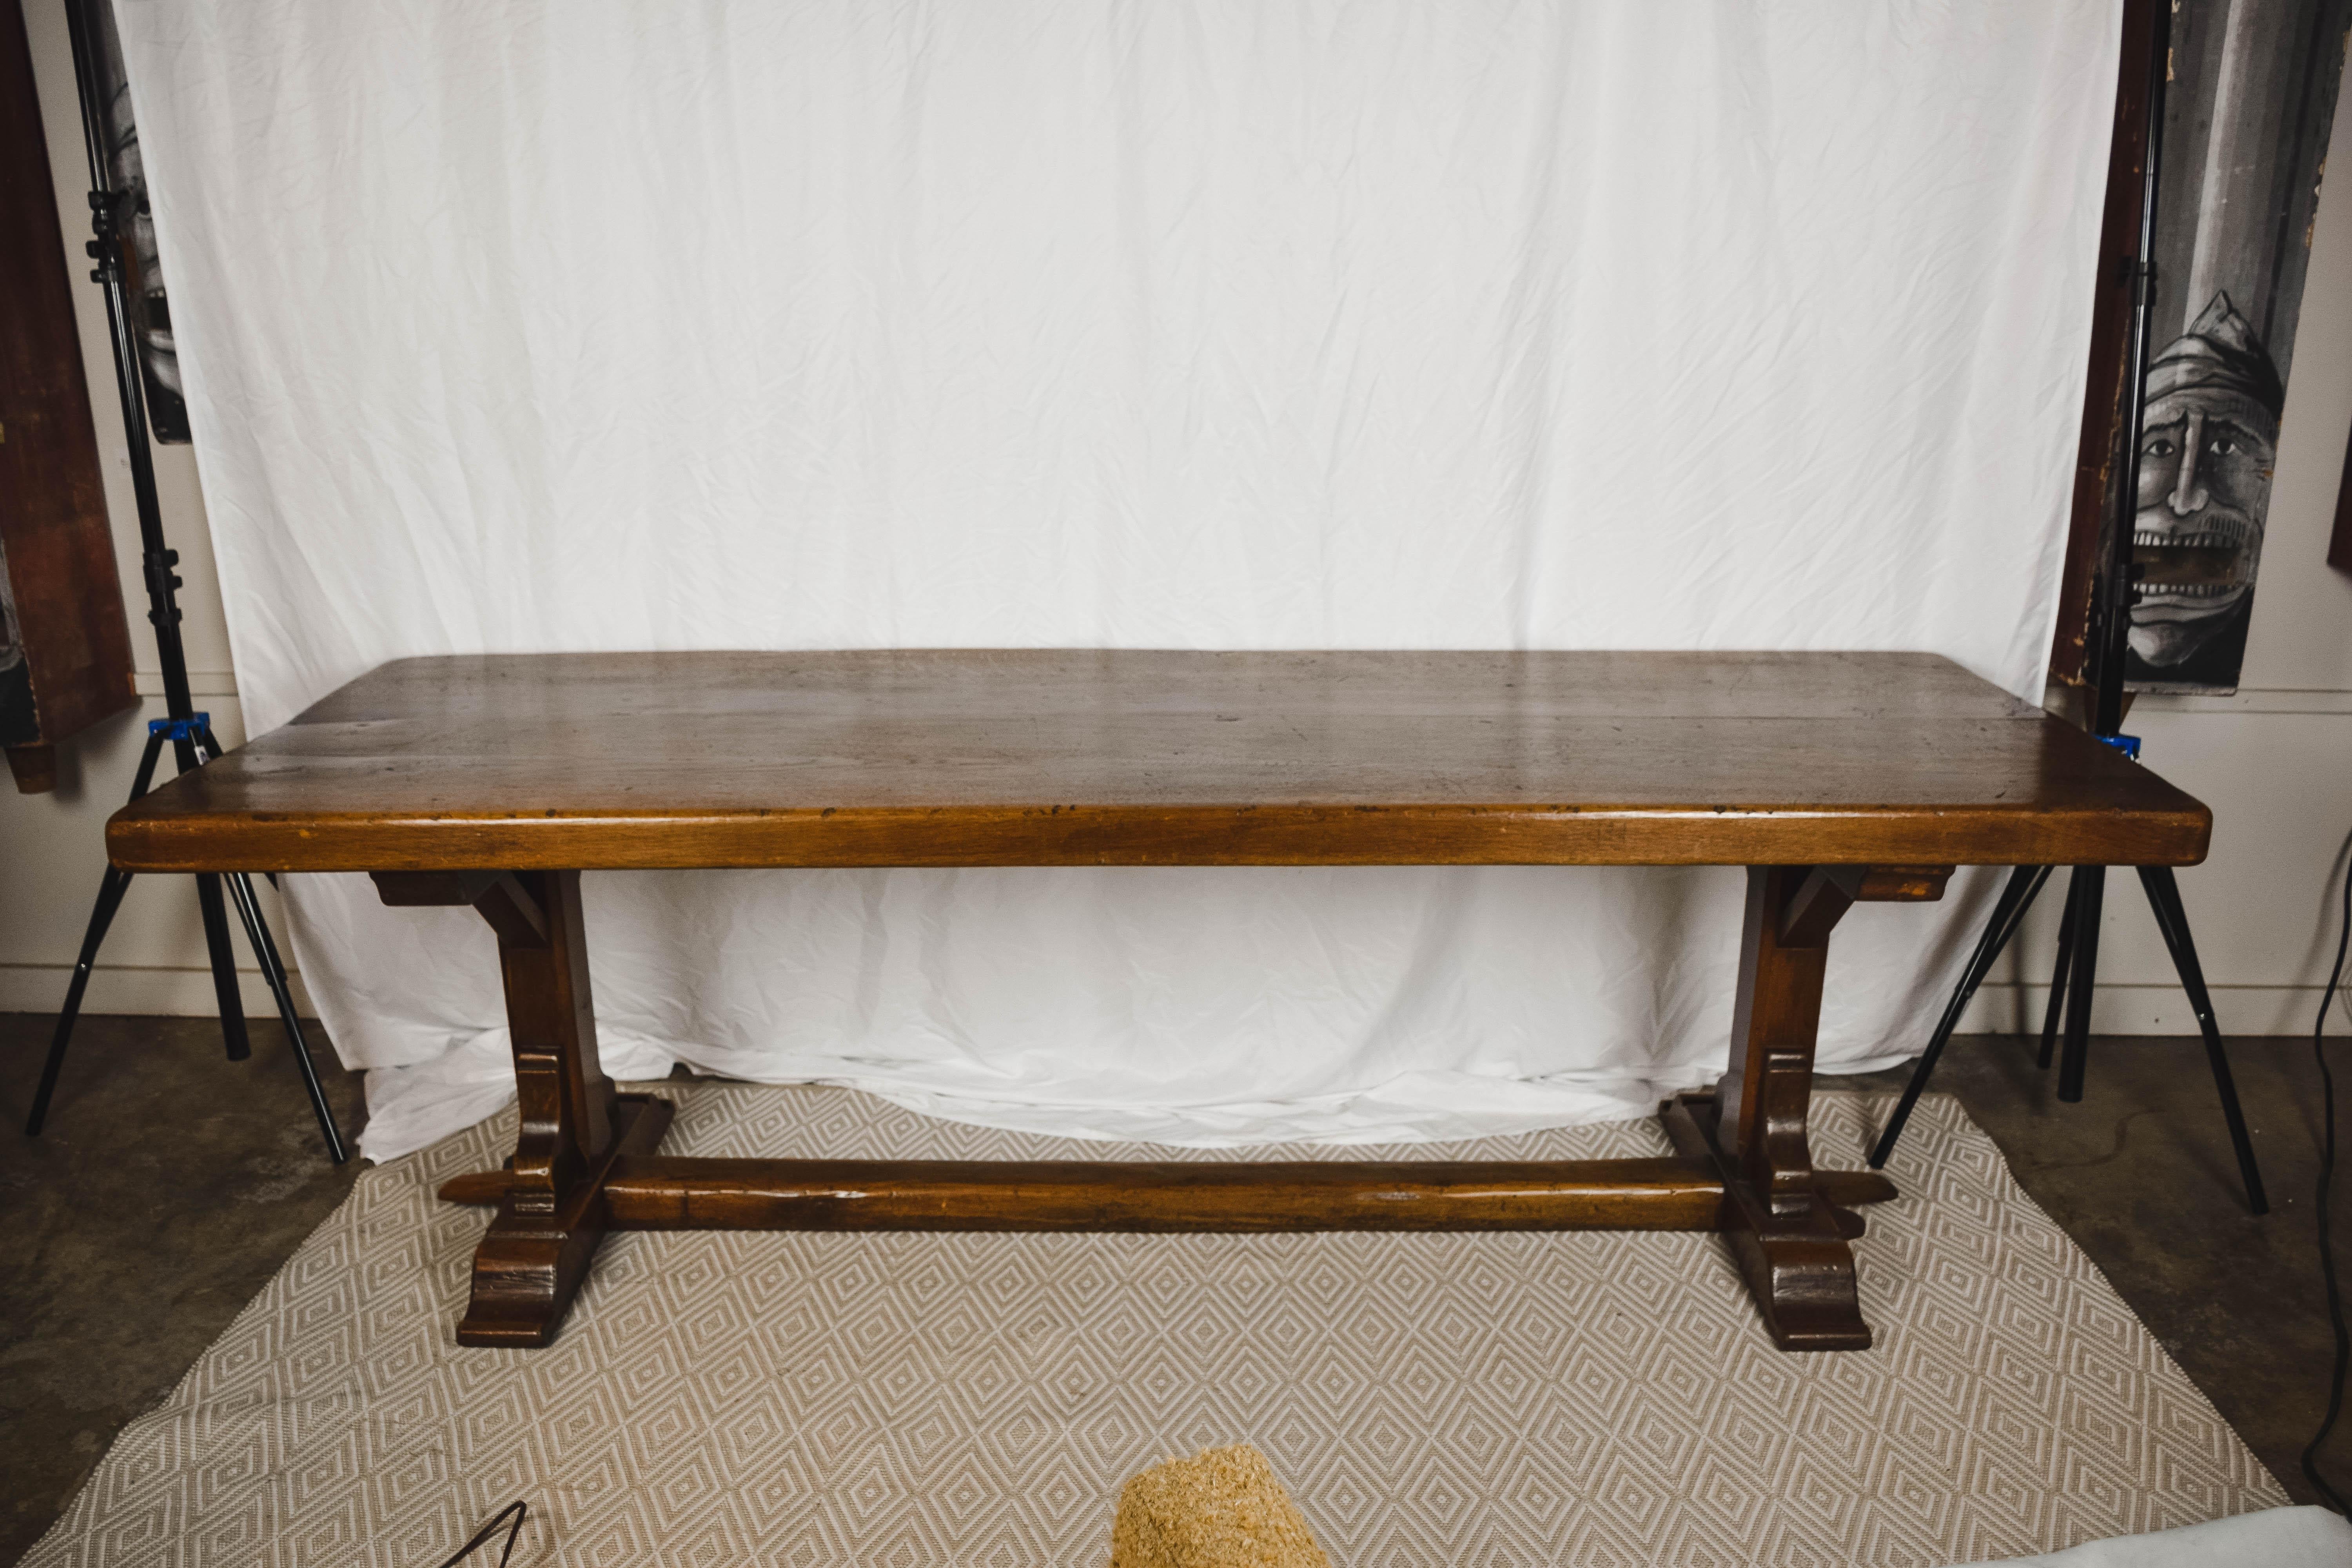 Found in Northern France, this 19th century oak refectory or monastery table features a three-inch thick top made from three planks of wood with a gorgeous wood patina that can only be achieved with age. The table rests on a sturdy trestle base